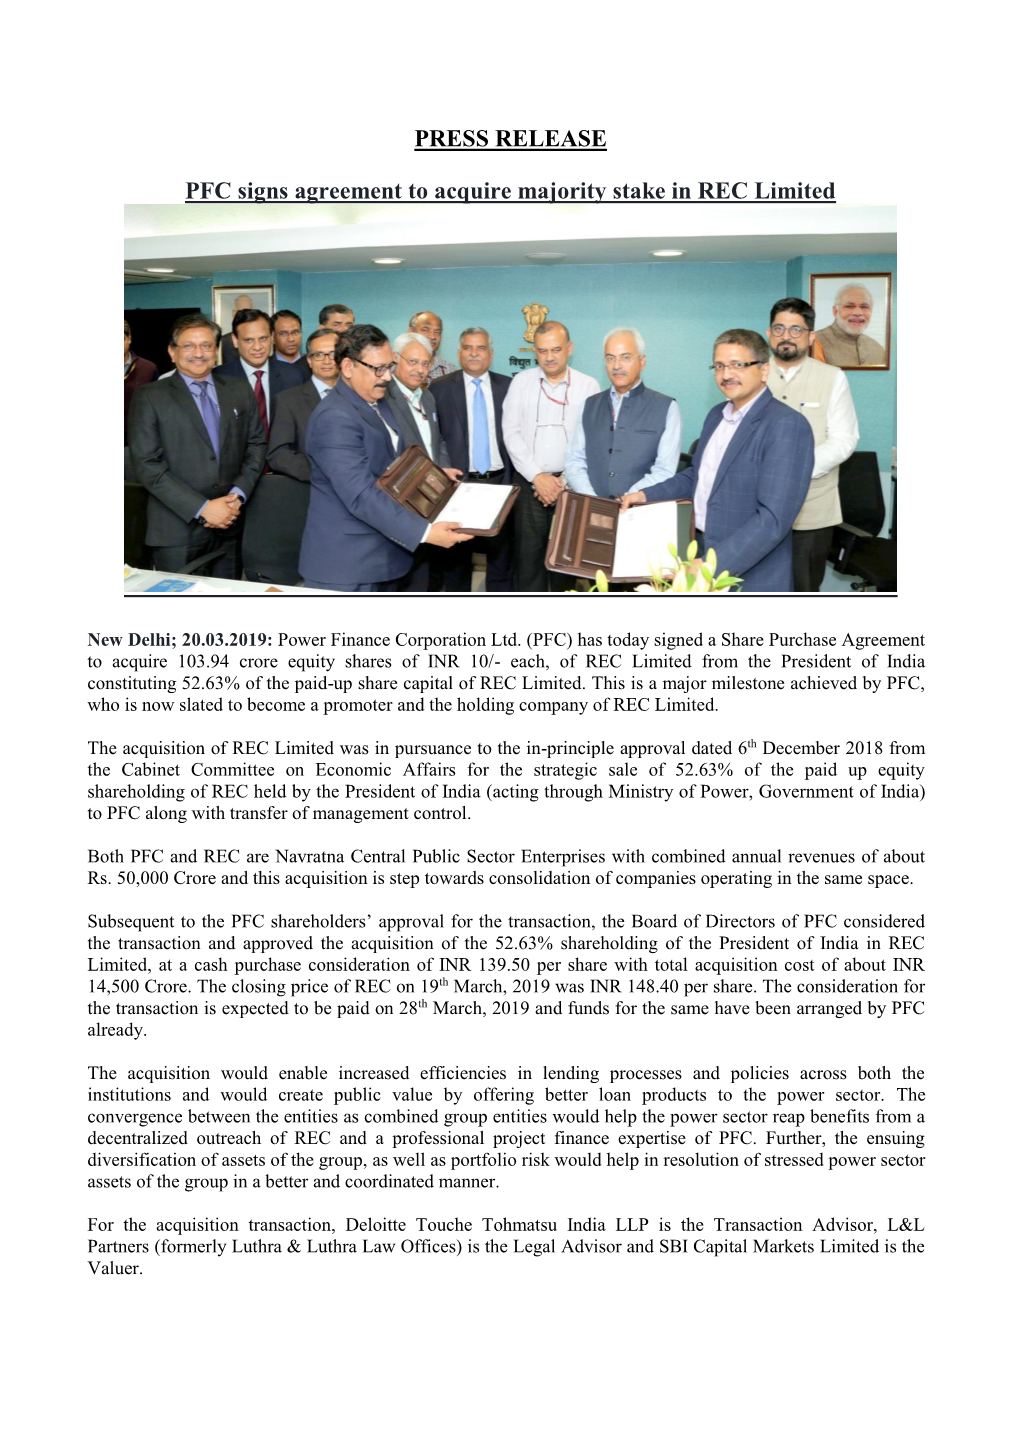 PRESS RELEASE PFC Signs Agreement to Acquire Majority Stake in REC Limited